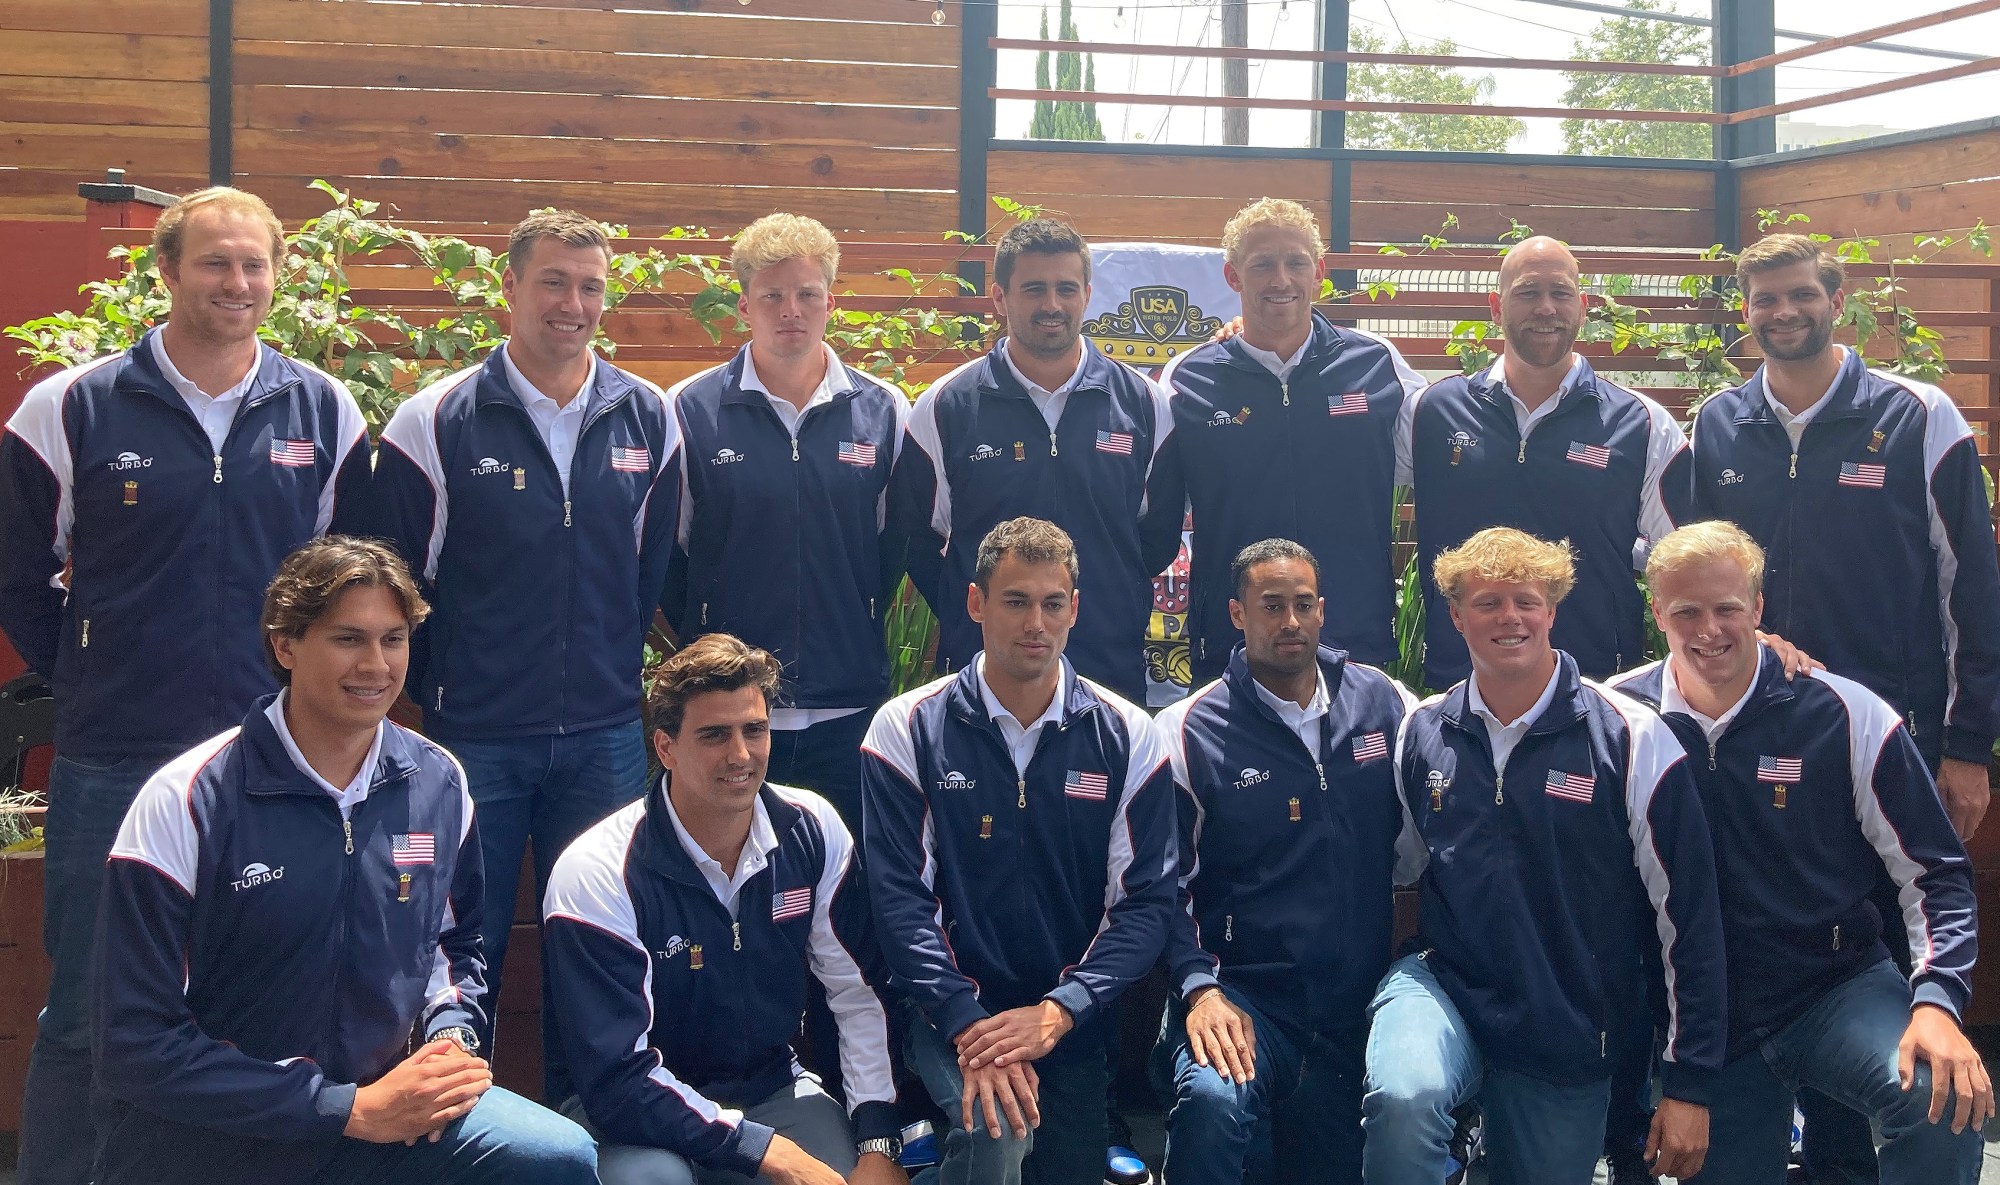 USA Water Polo presents its 13-player men's team for the Paris Olympics during a press conference in Los Angeles. (Photo by Dan Albano, Orange County Register/SCNG)